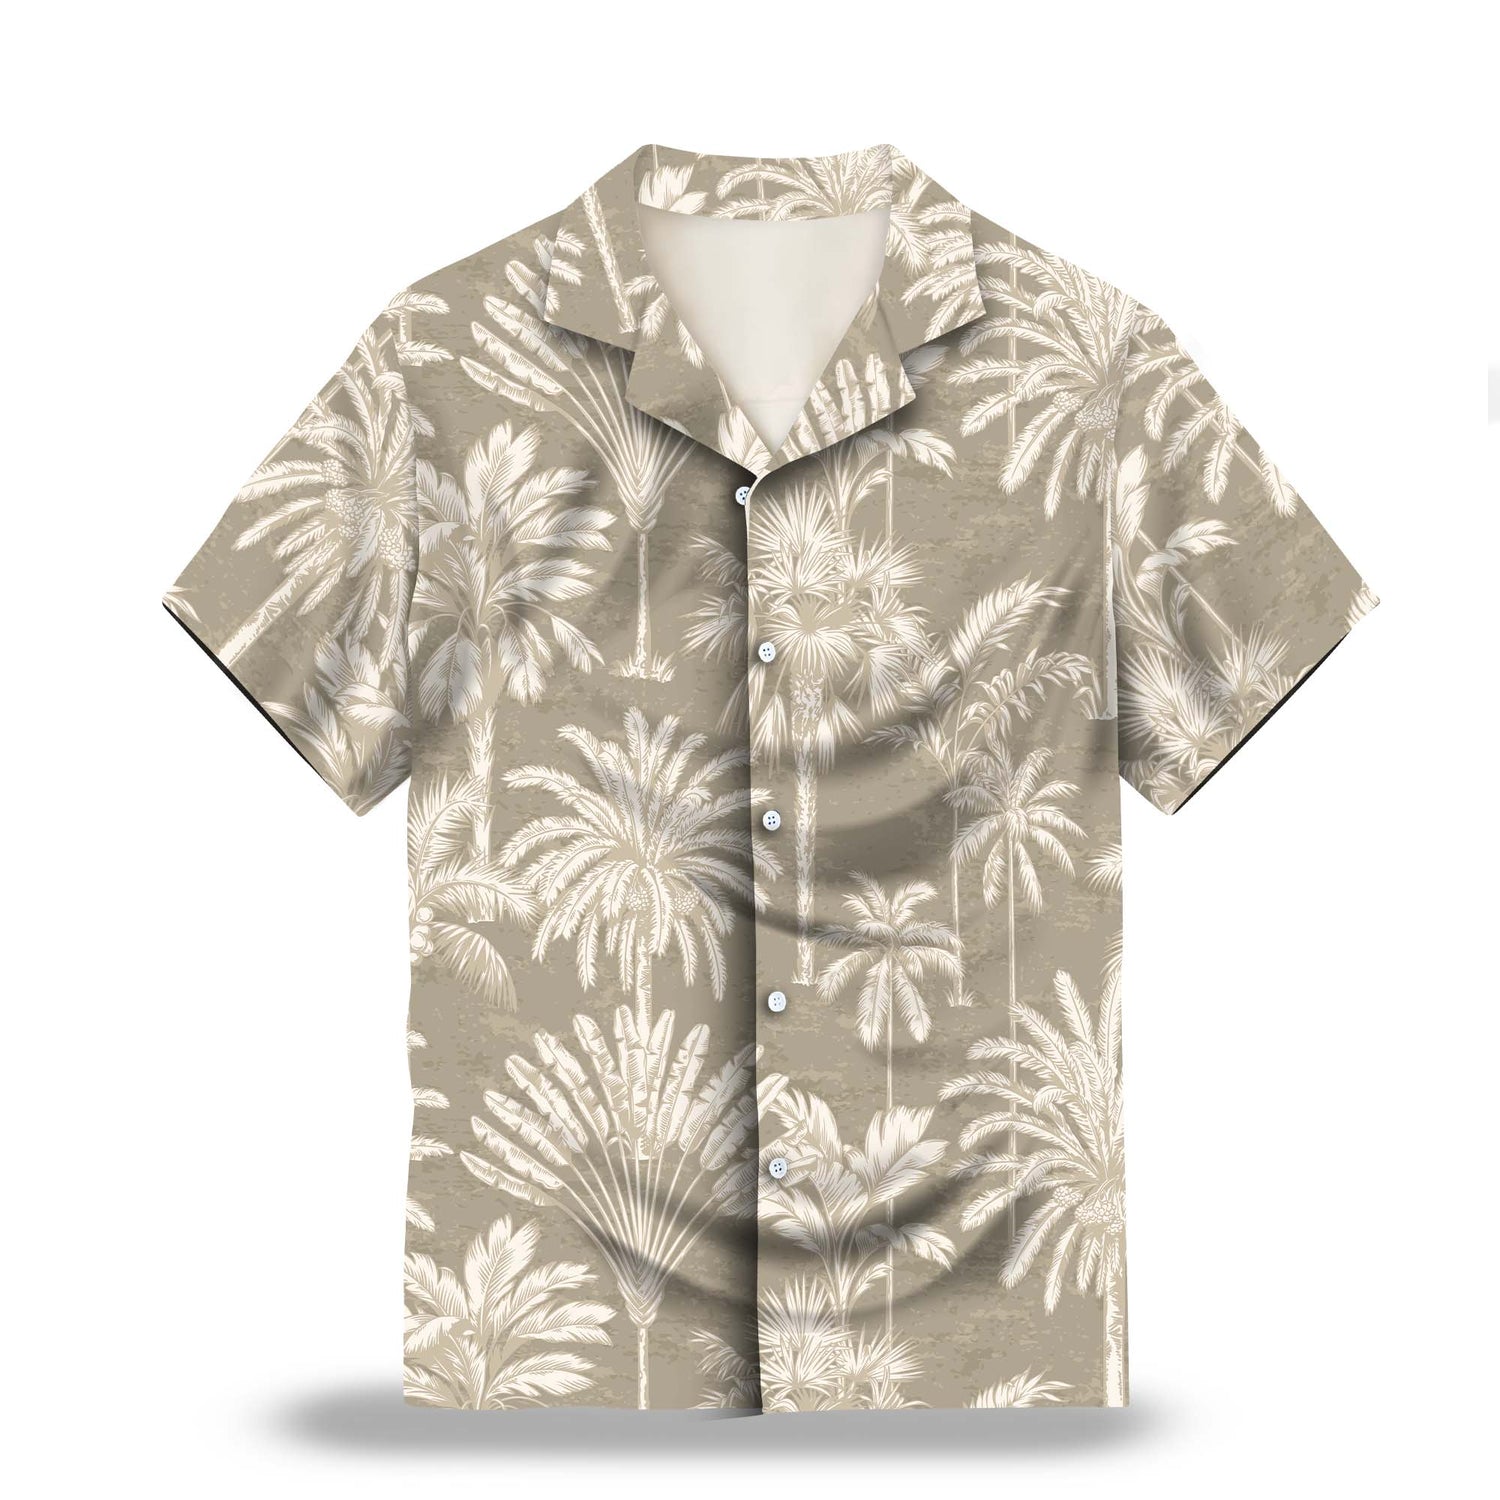 Tropical Tree in Cotton Grey and Ivory Custom Hawaiian Shirt. Featuring a stylish tropical tree design in a monochrome color palette of cotton grey and ivory, perfect for a classic Hawaiian look.